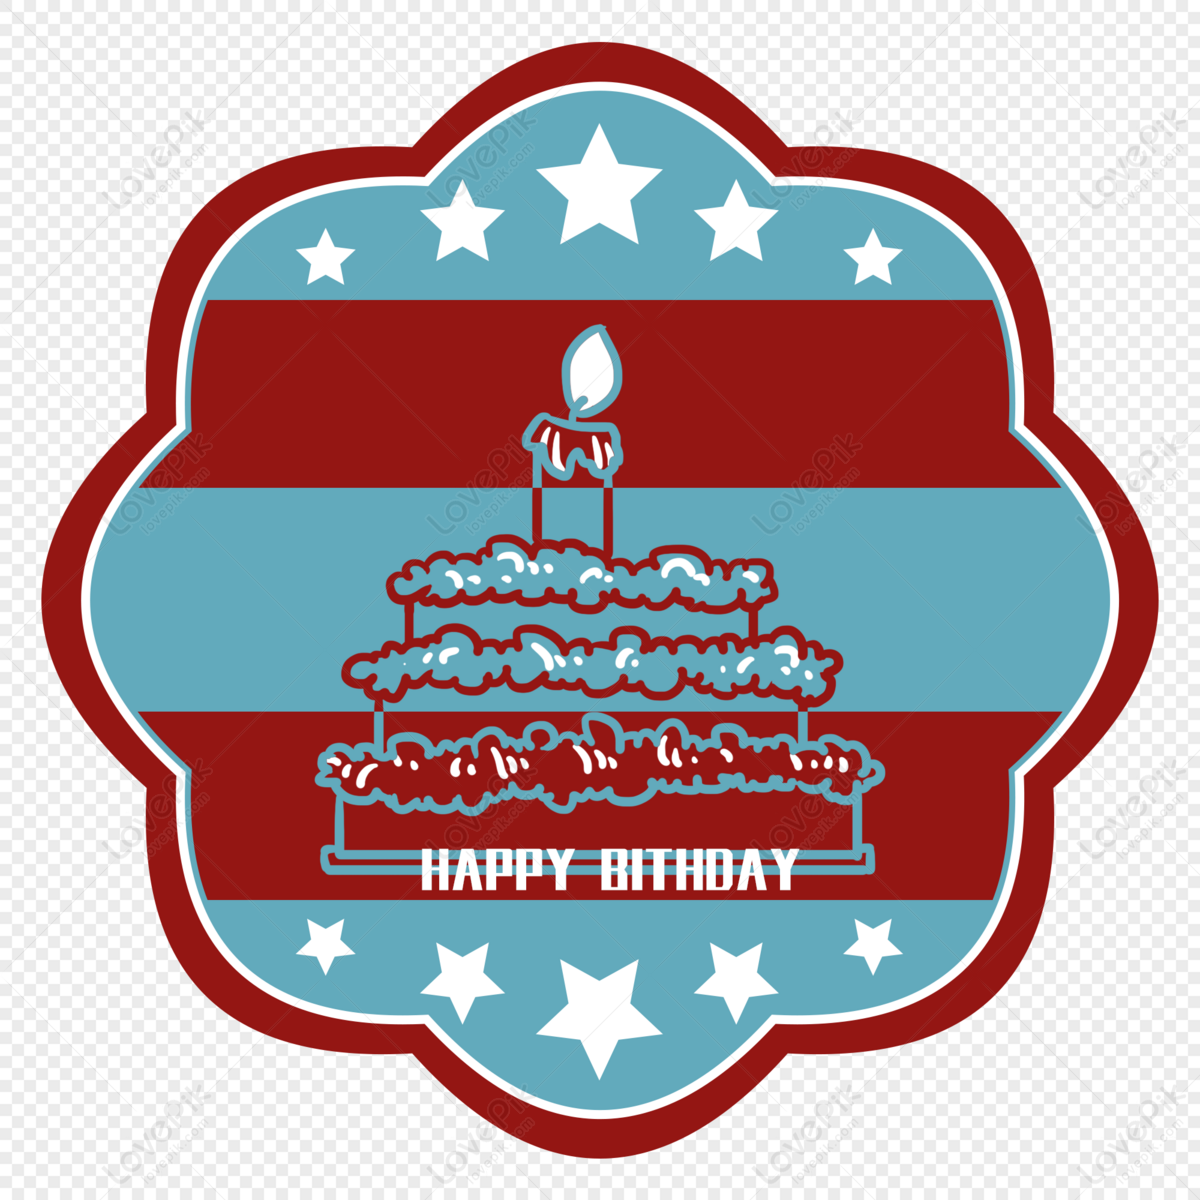 Happy Birthday Cake Label PNG Image Free Download And Clipart Image For  Free Download - Lovepik | 400358151